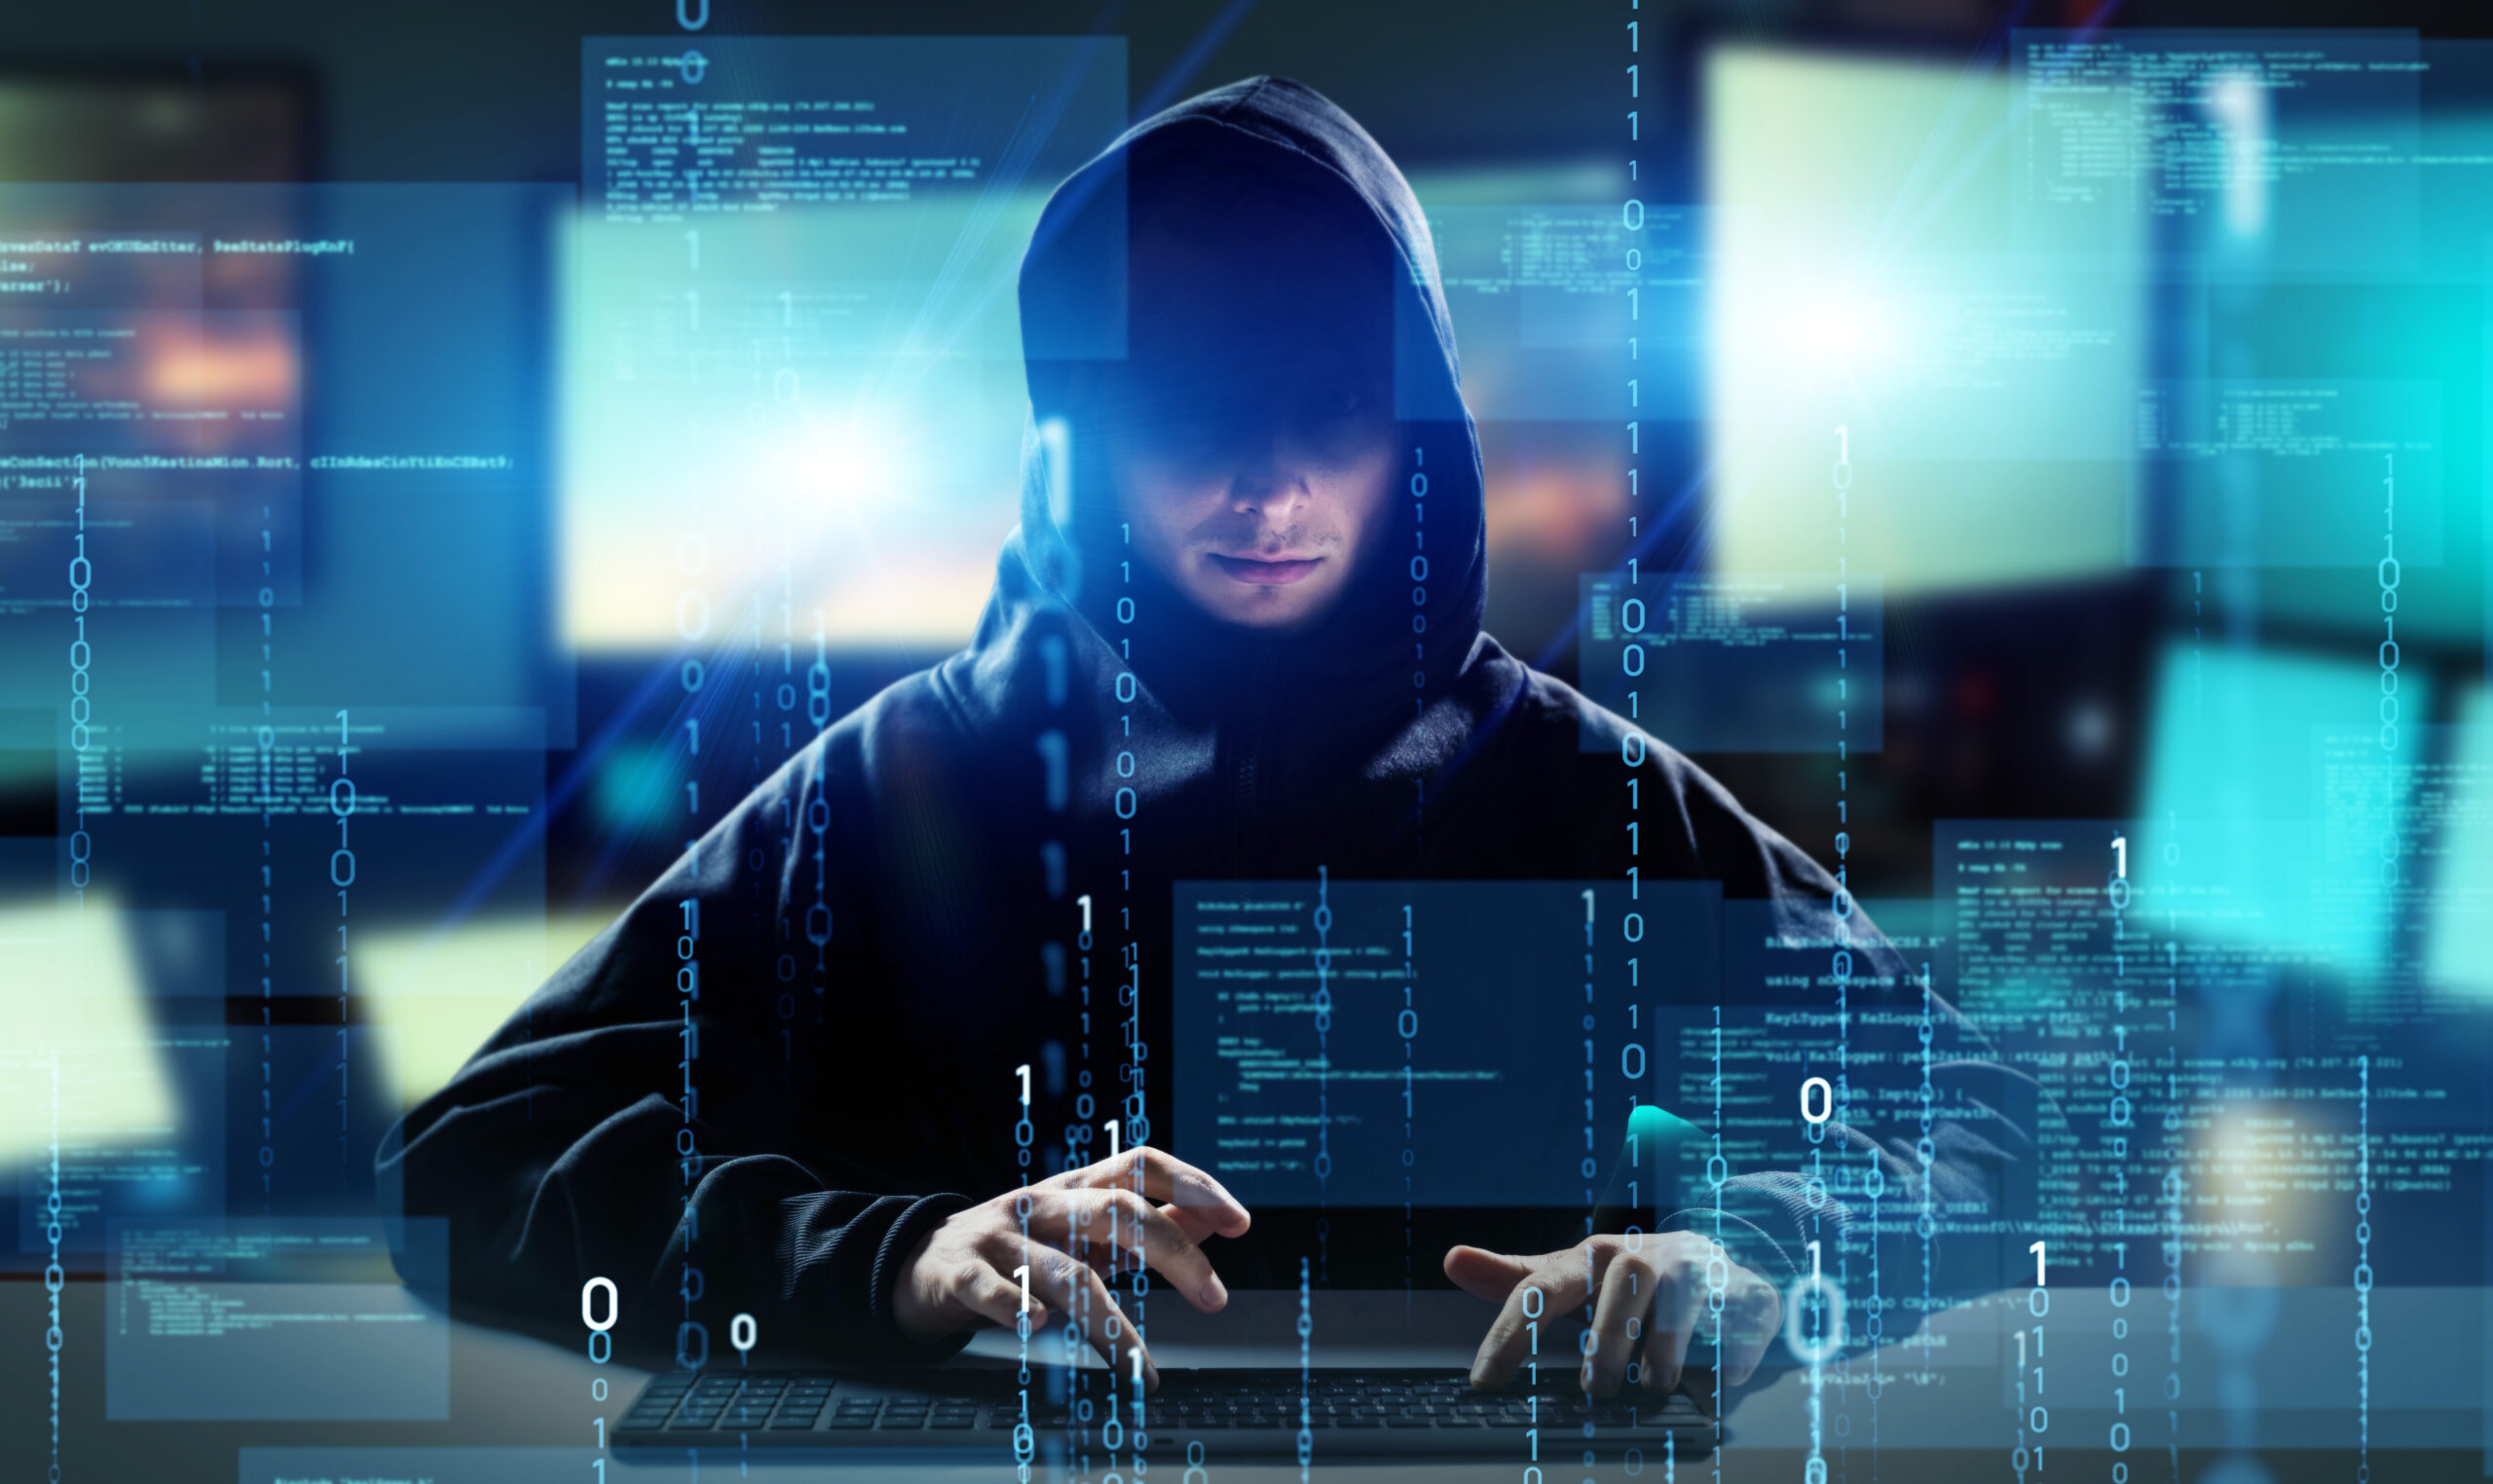 Hacker in PC room. Cyber crime. Wide image for banners, advertis